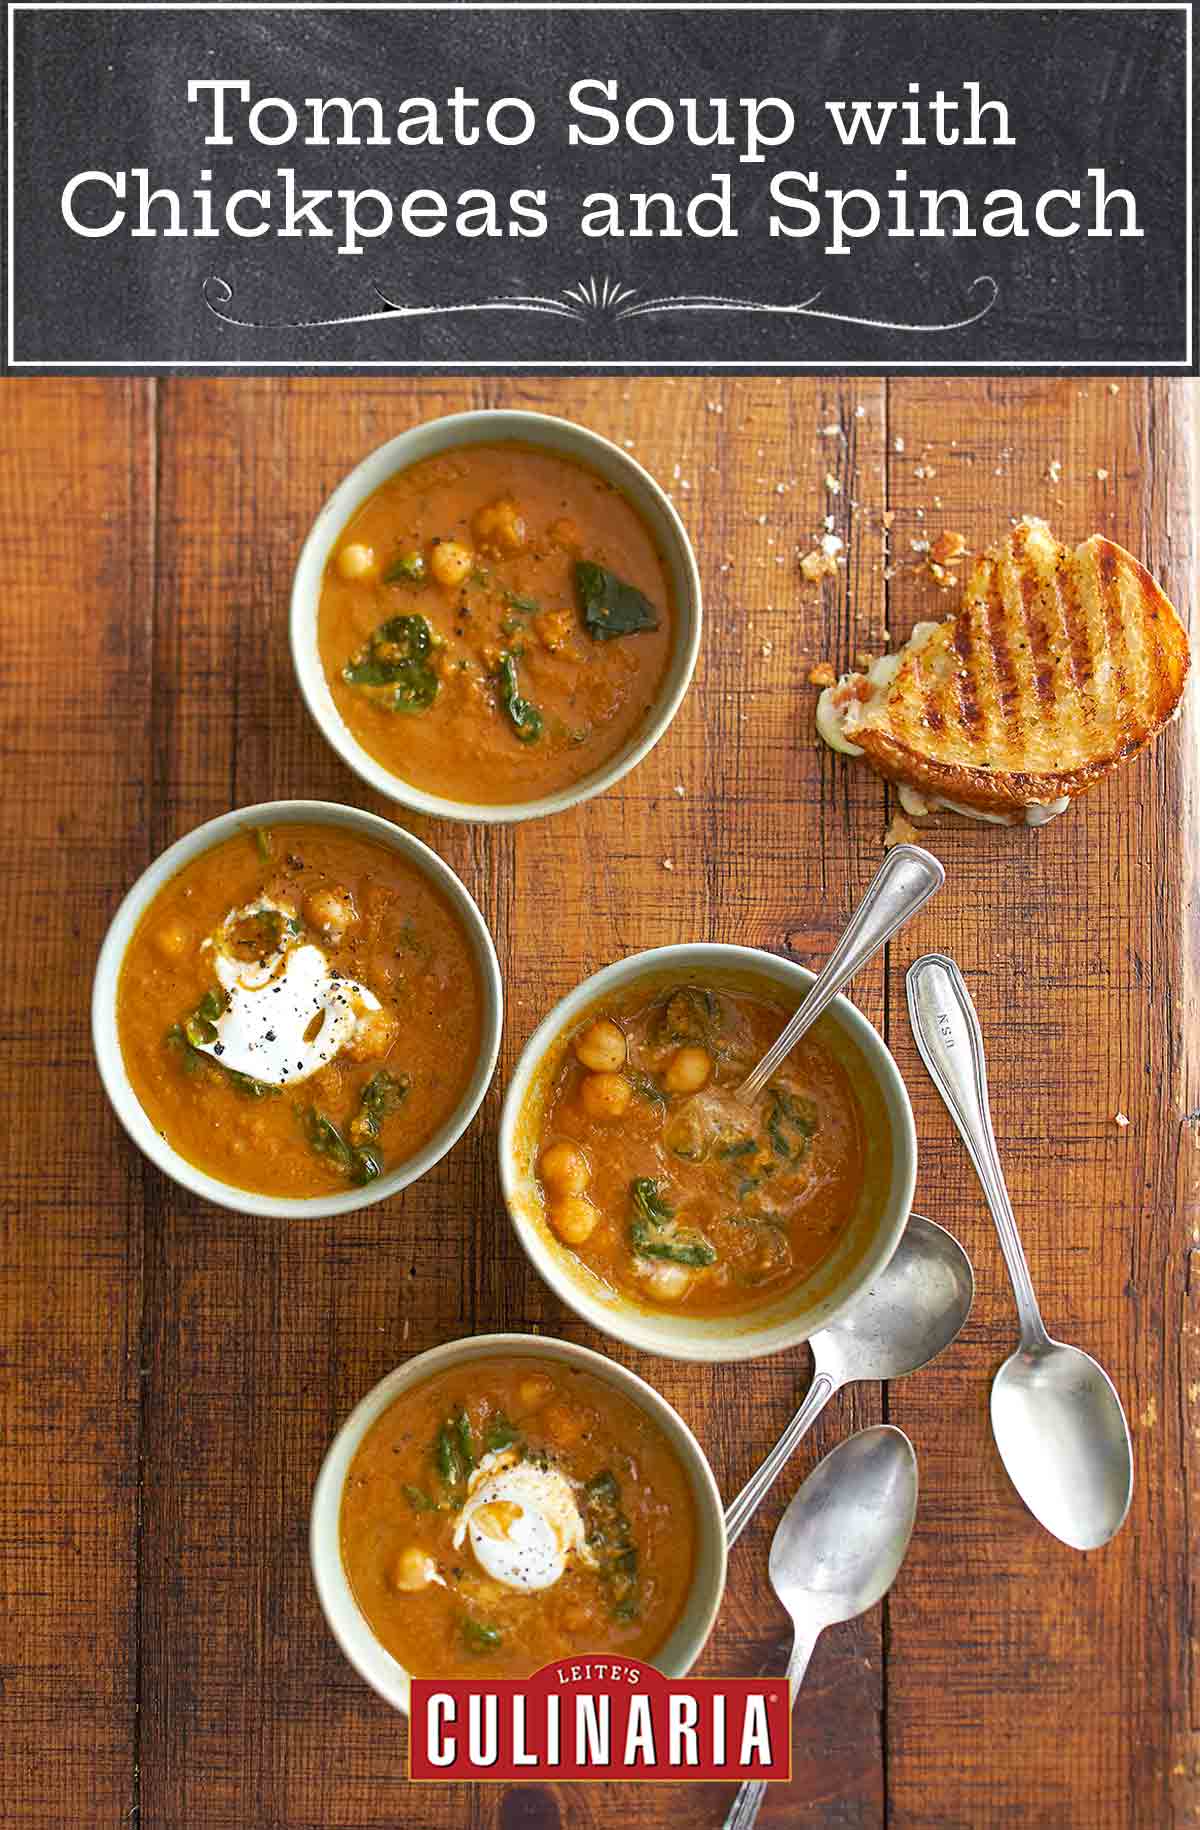 Three white bowls on a wooden table with soup spoons and half a grilled cheese sandwich. Each bowl is filled with tomato soup with chickpeas and spinach and topped with yogurt.